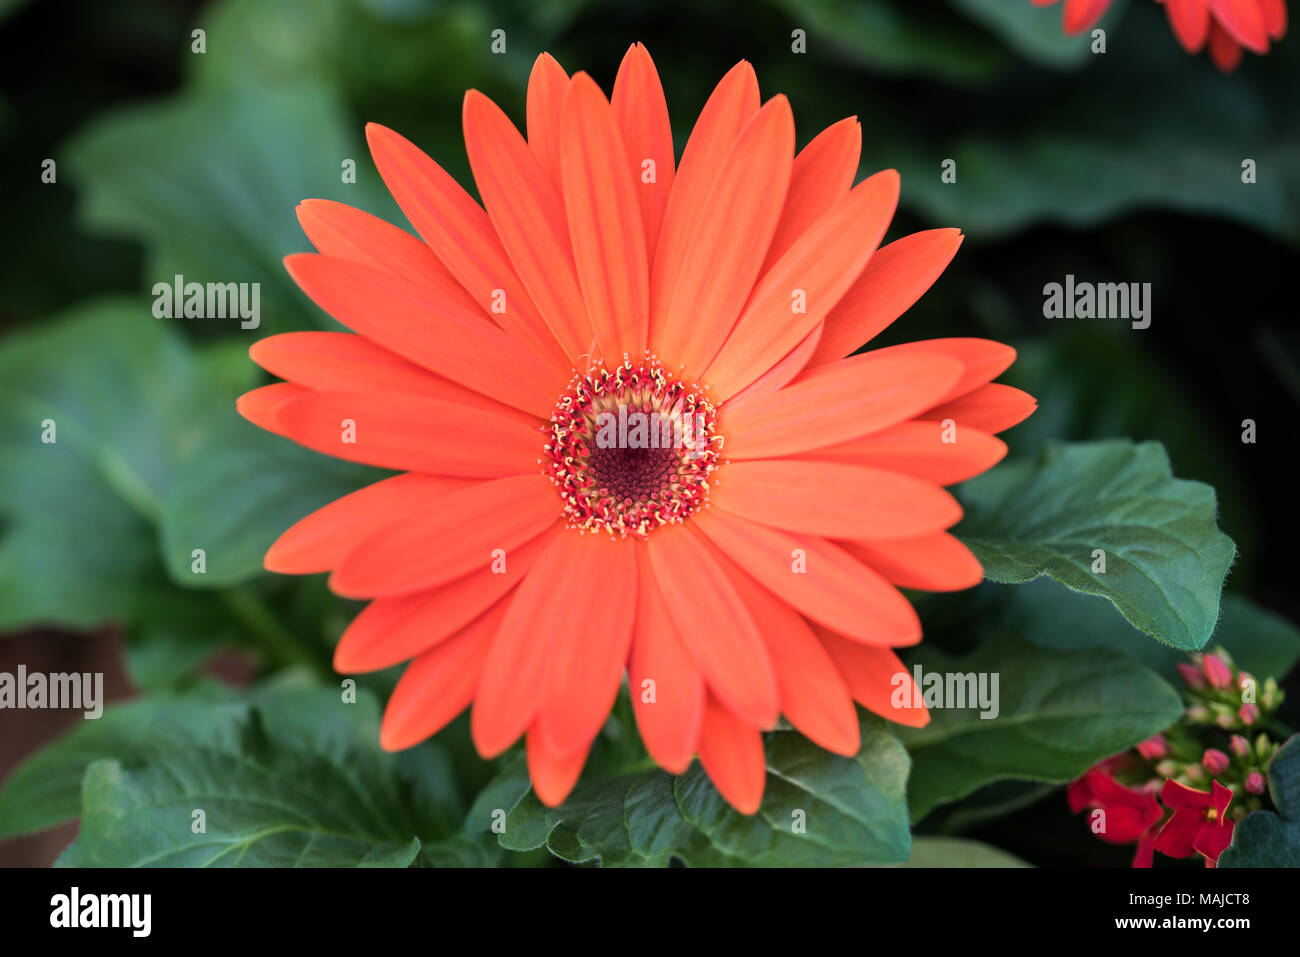 Red  gerbera daisy flower with leaves Stock Photo